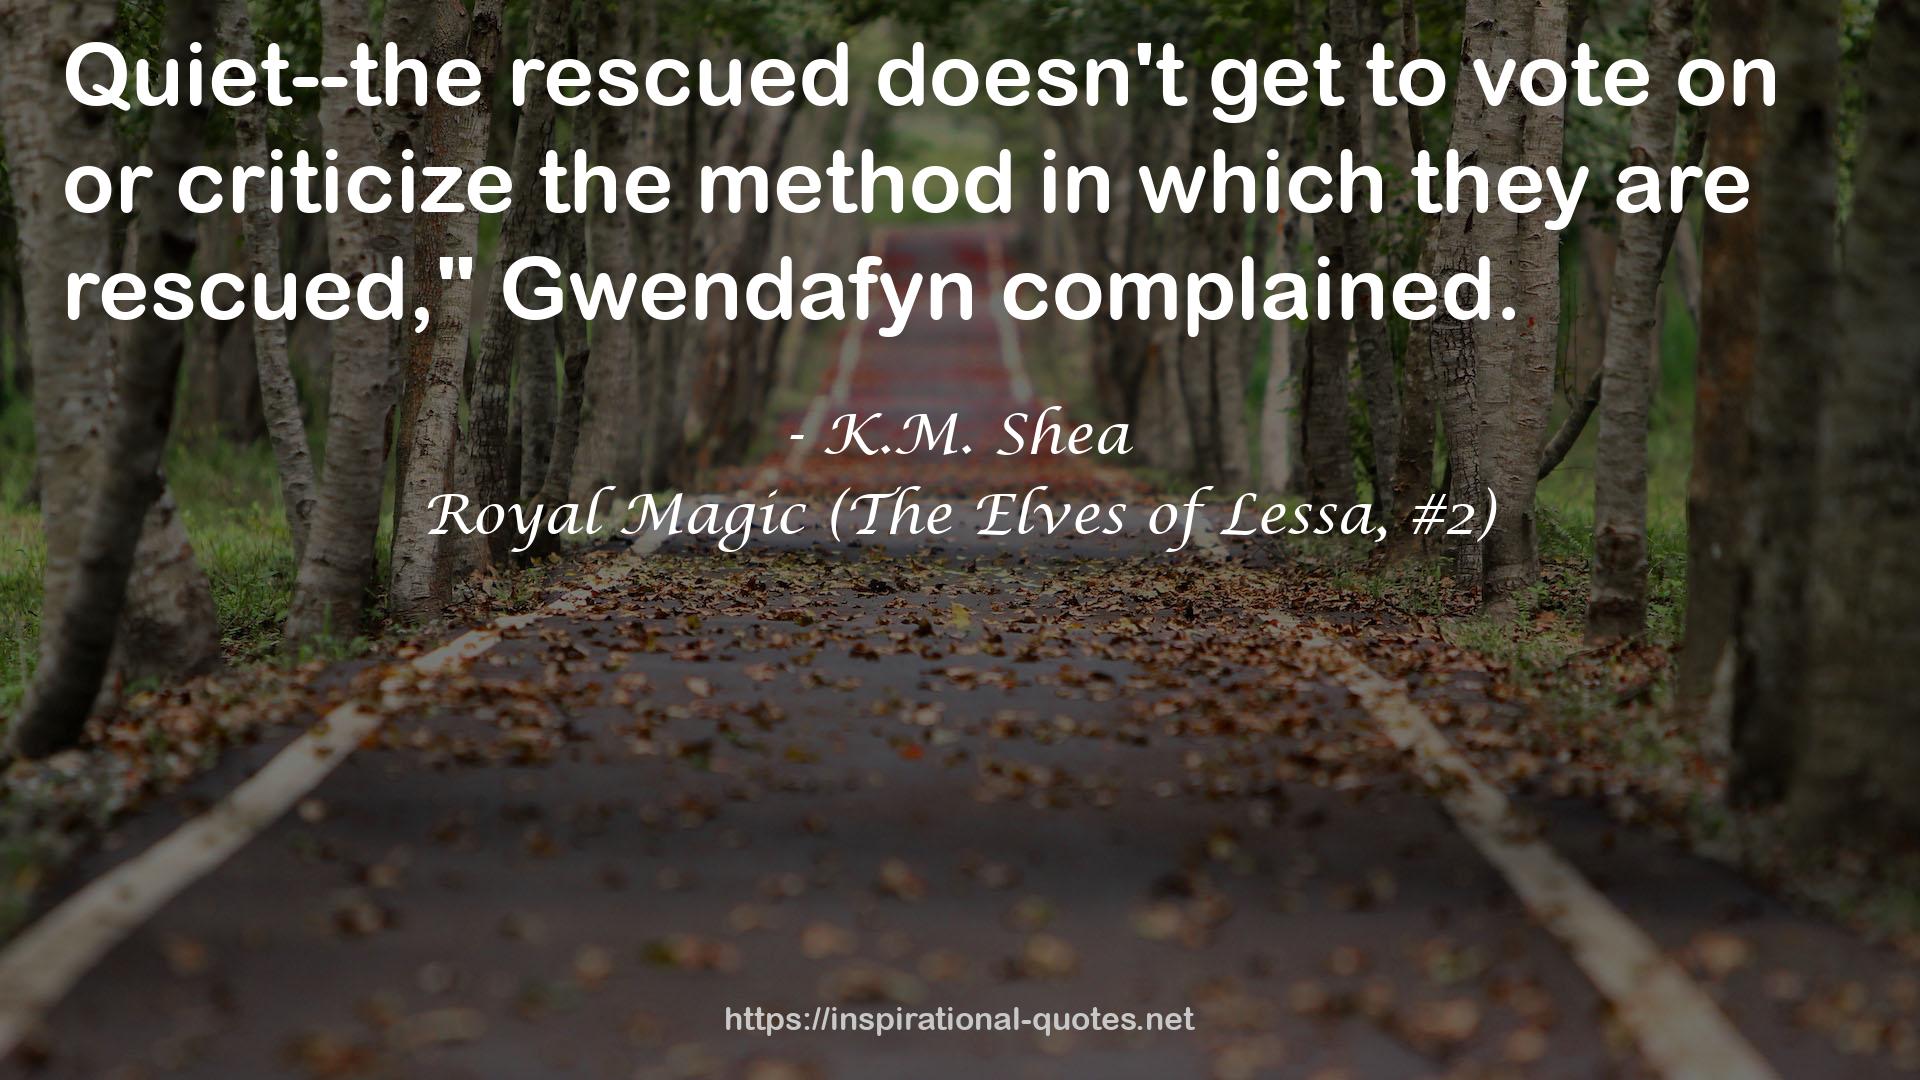 Royal Magic (The Elves of Lessa, #2) QUOTES